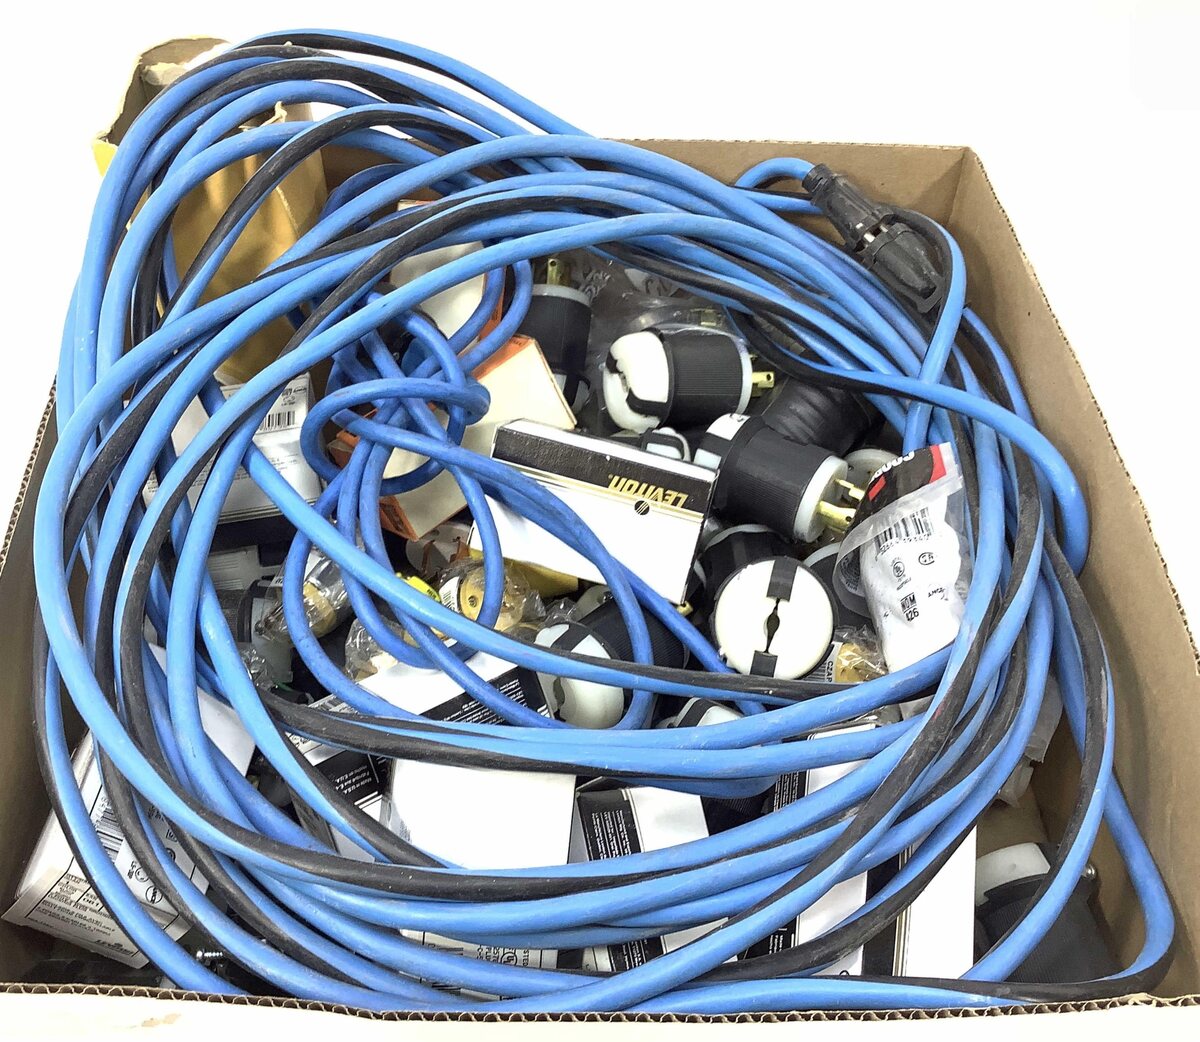 Can you use a 110V extension cord with 220V? - Quora